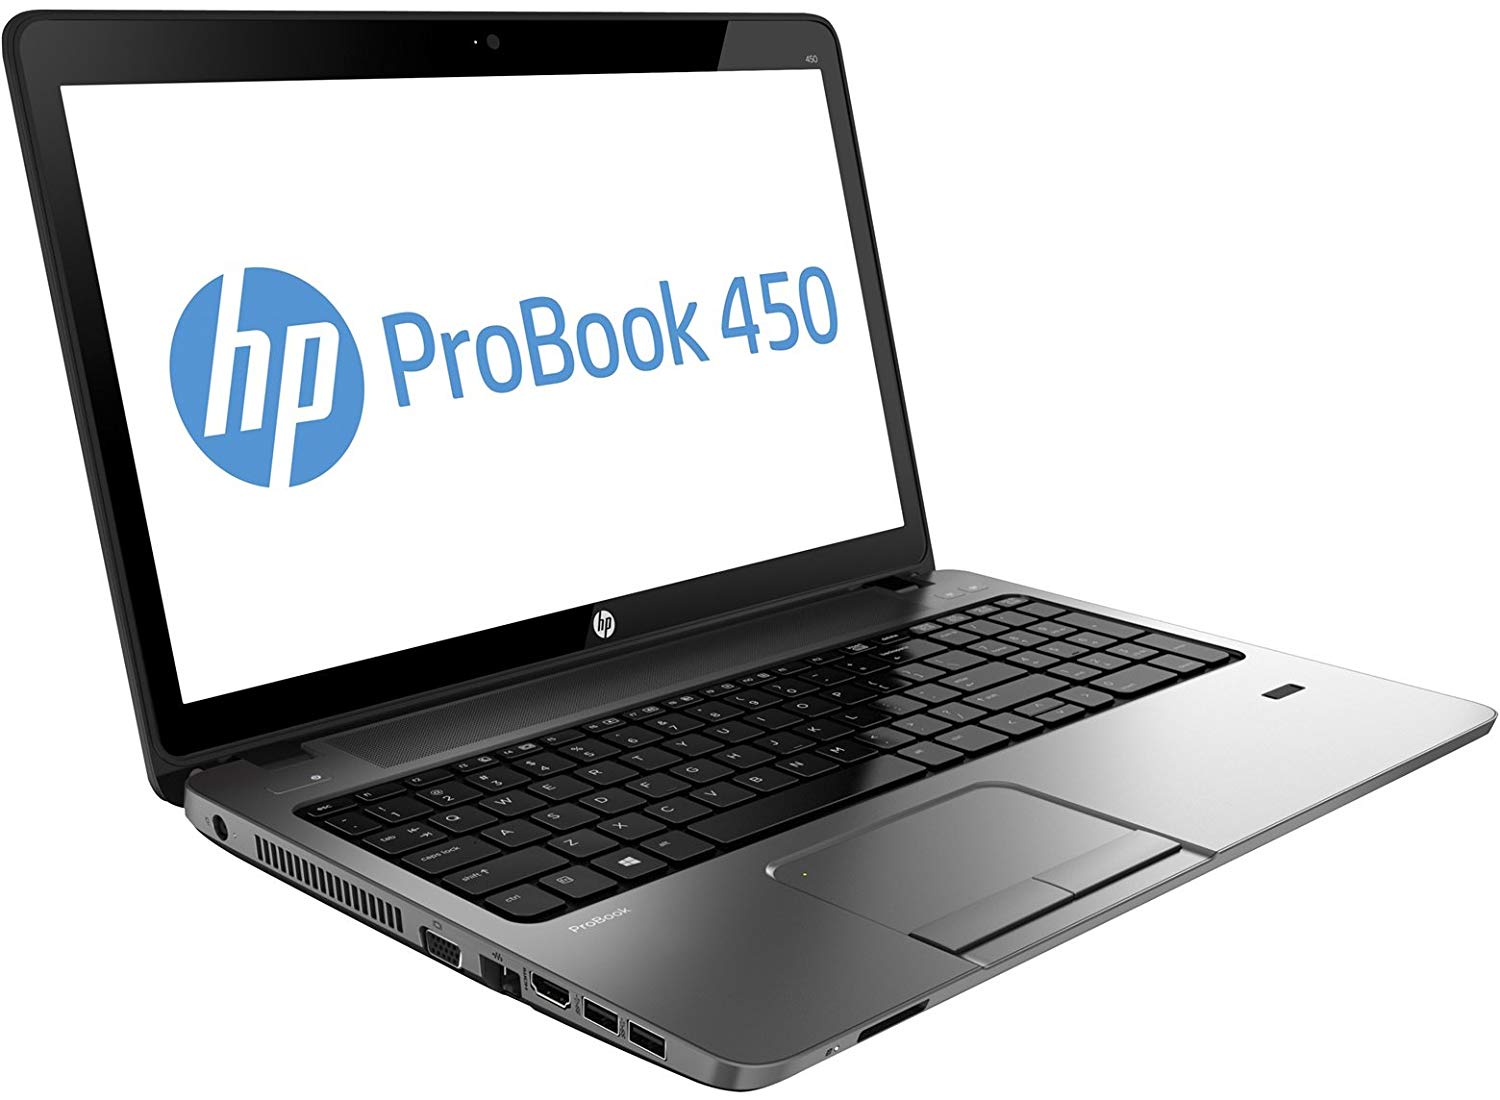 HP ProBook 450 G1 Notebook PC Drivers | Device Drivers